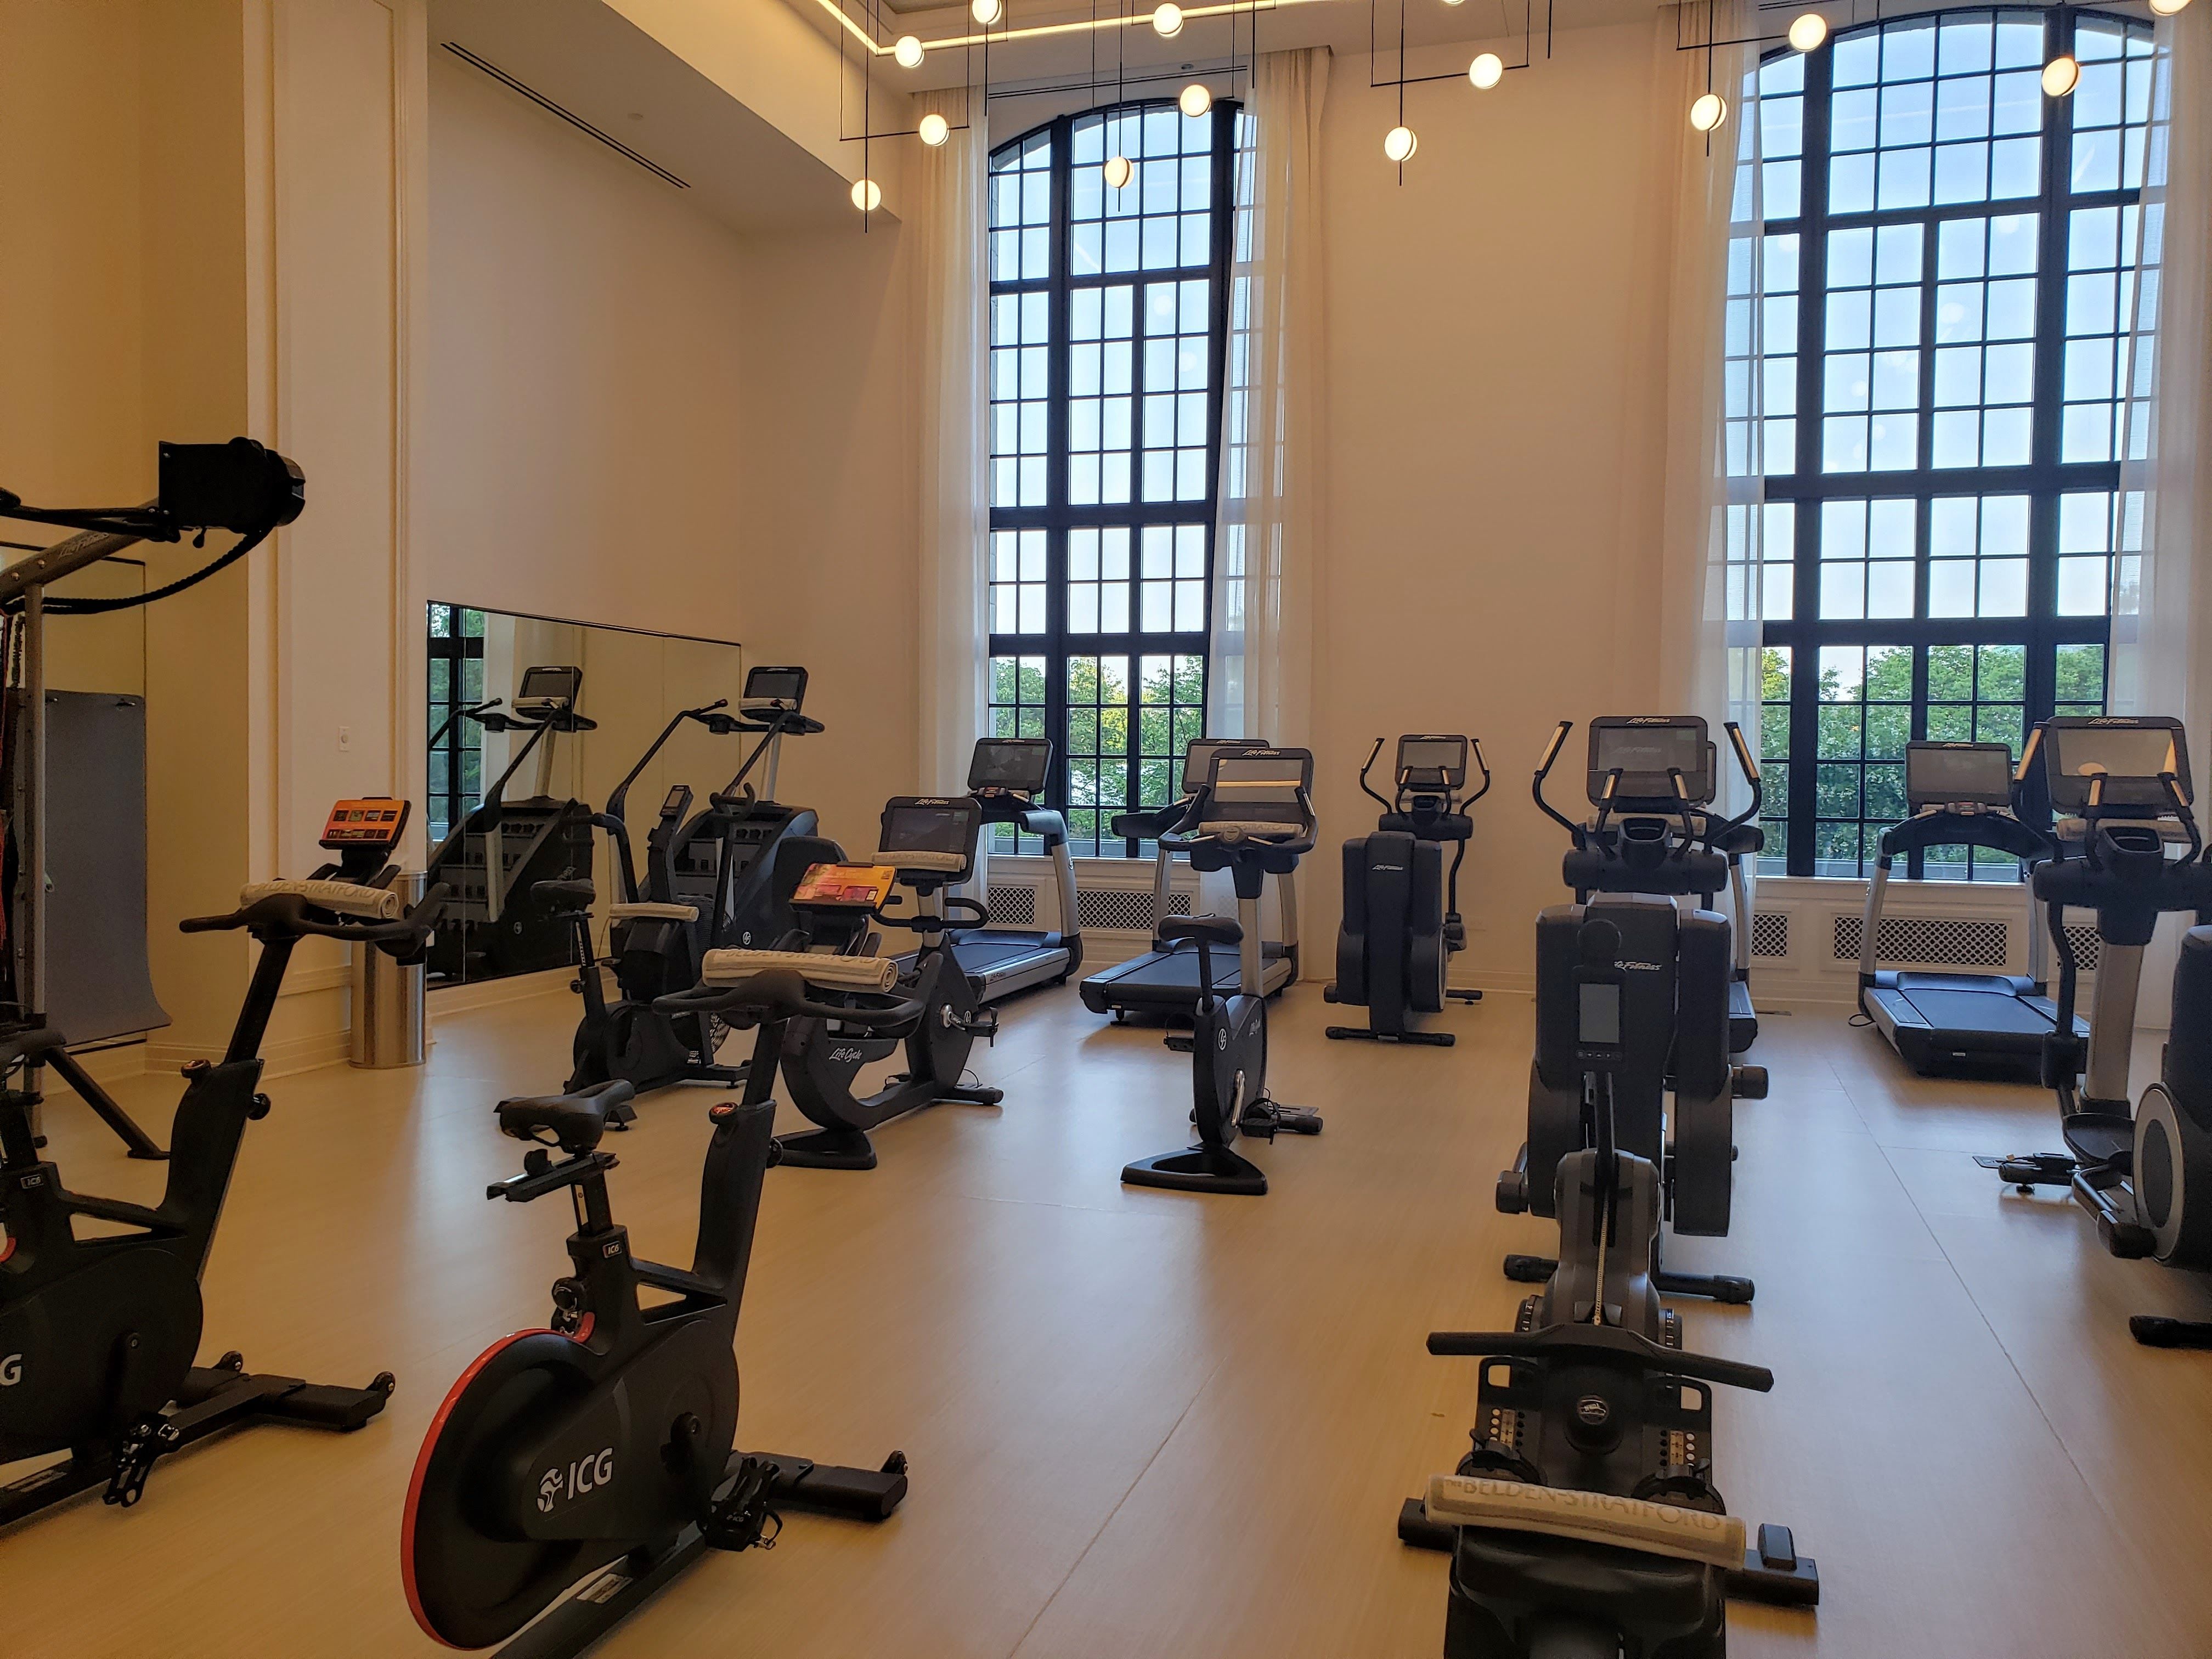 Ellipticals and treadmills stand in a row, facing two large floor-to-ceiling grid windows.